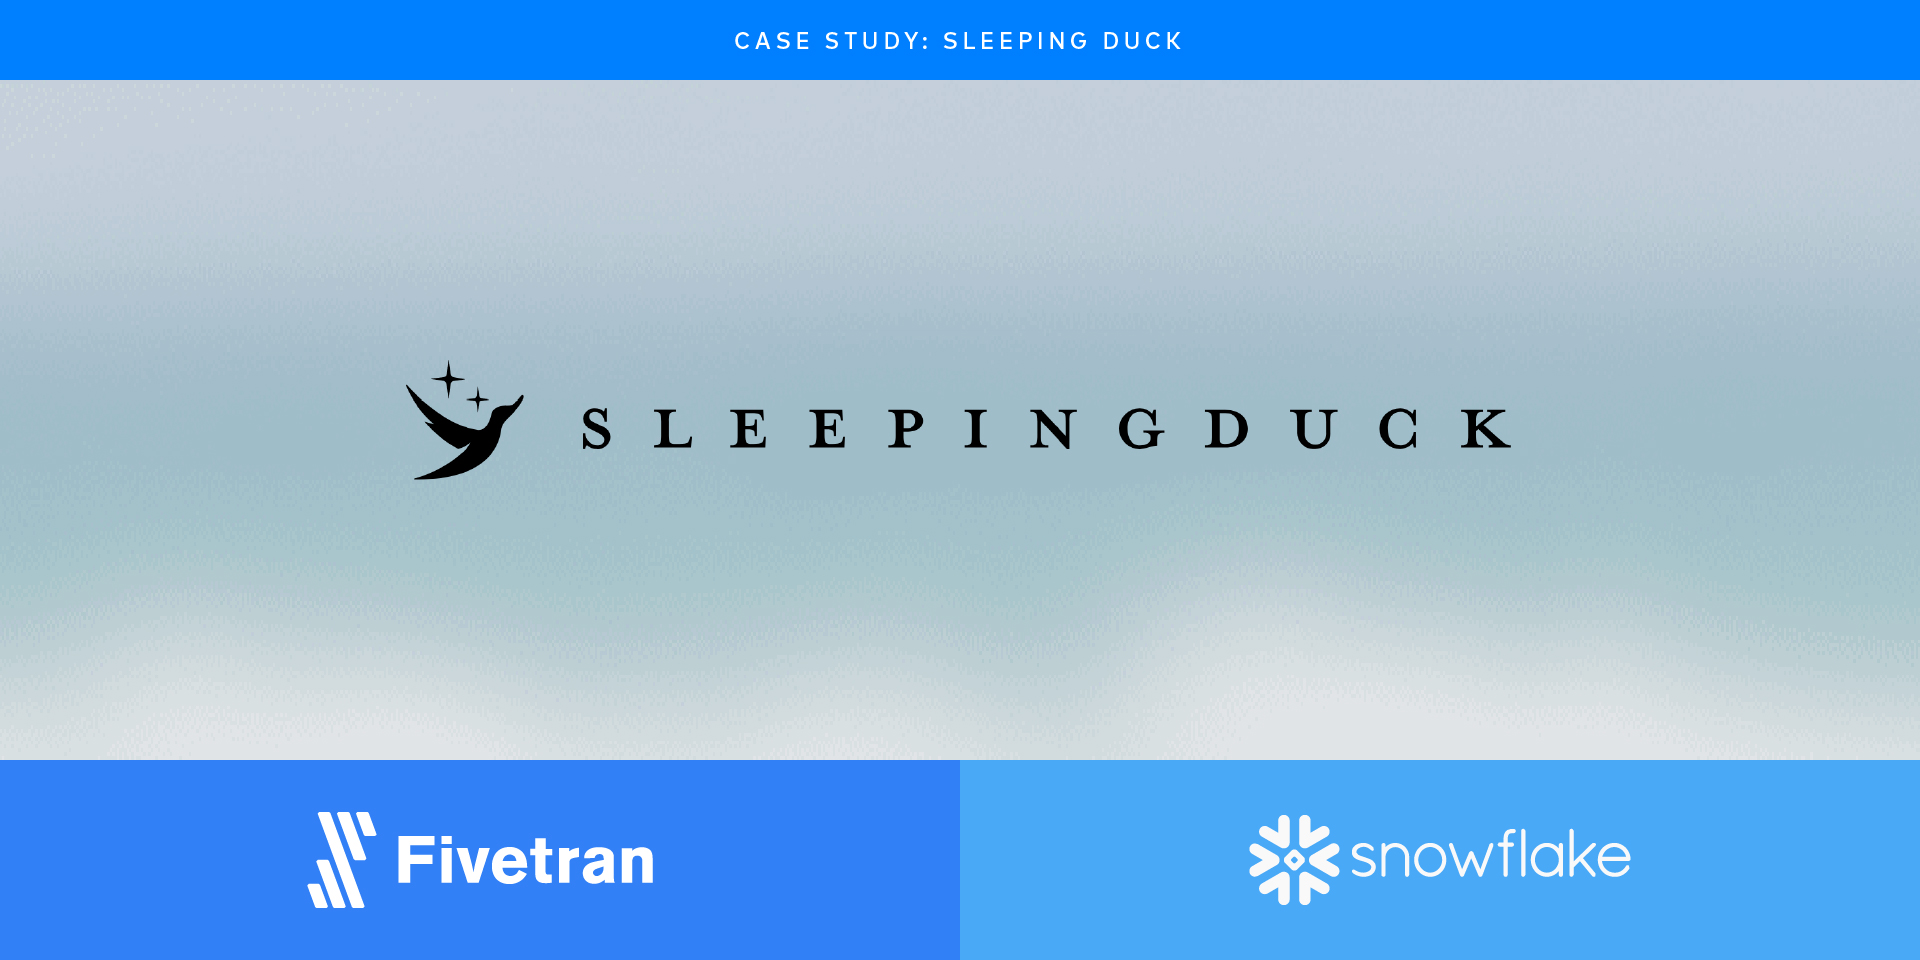 Fivetran and Snowflake enable data-driven decision making for Sleeping Duck